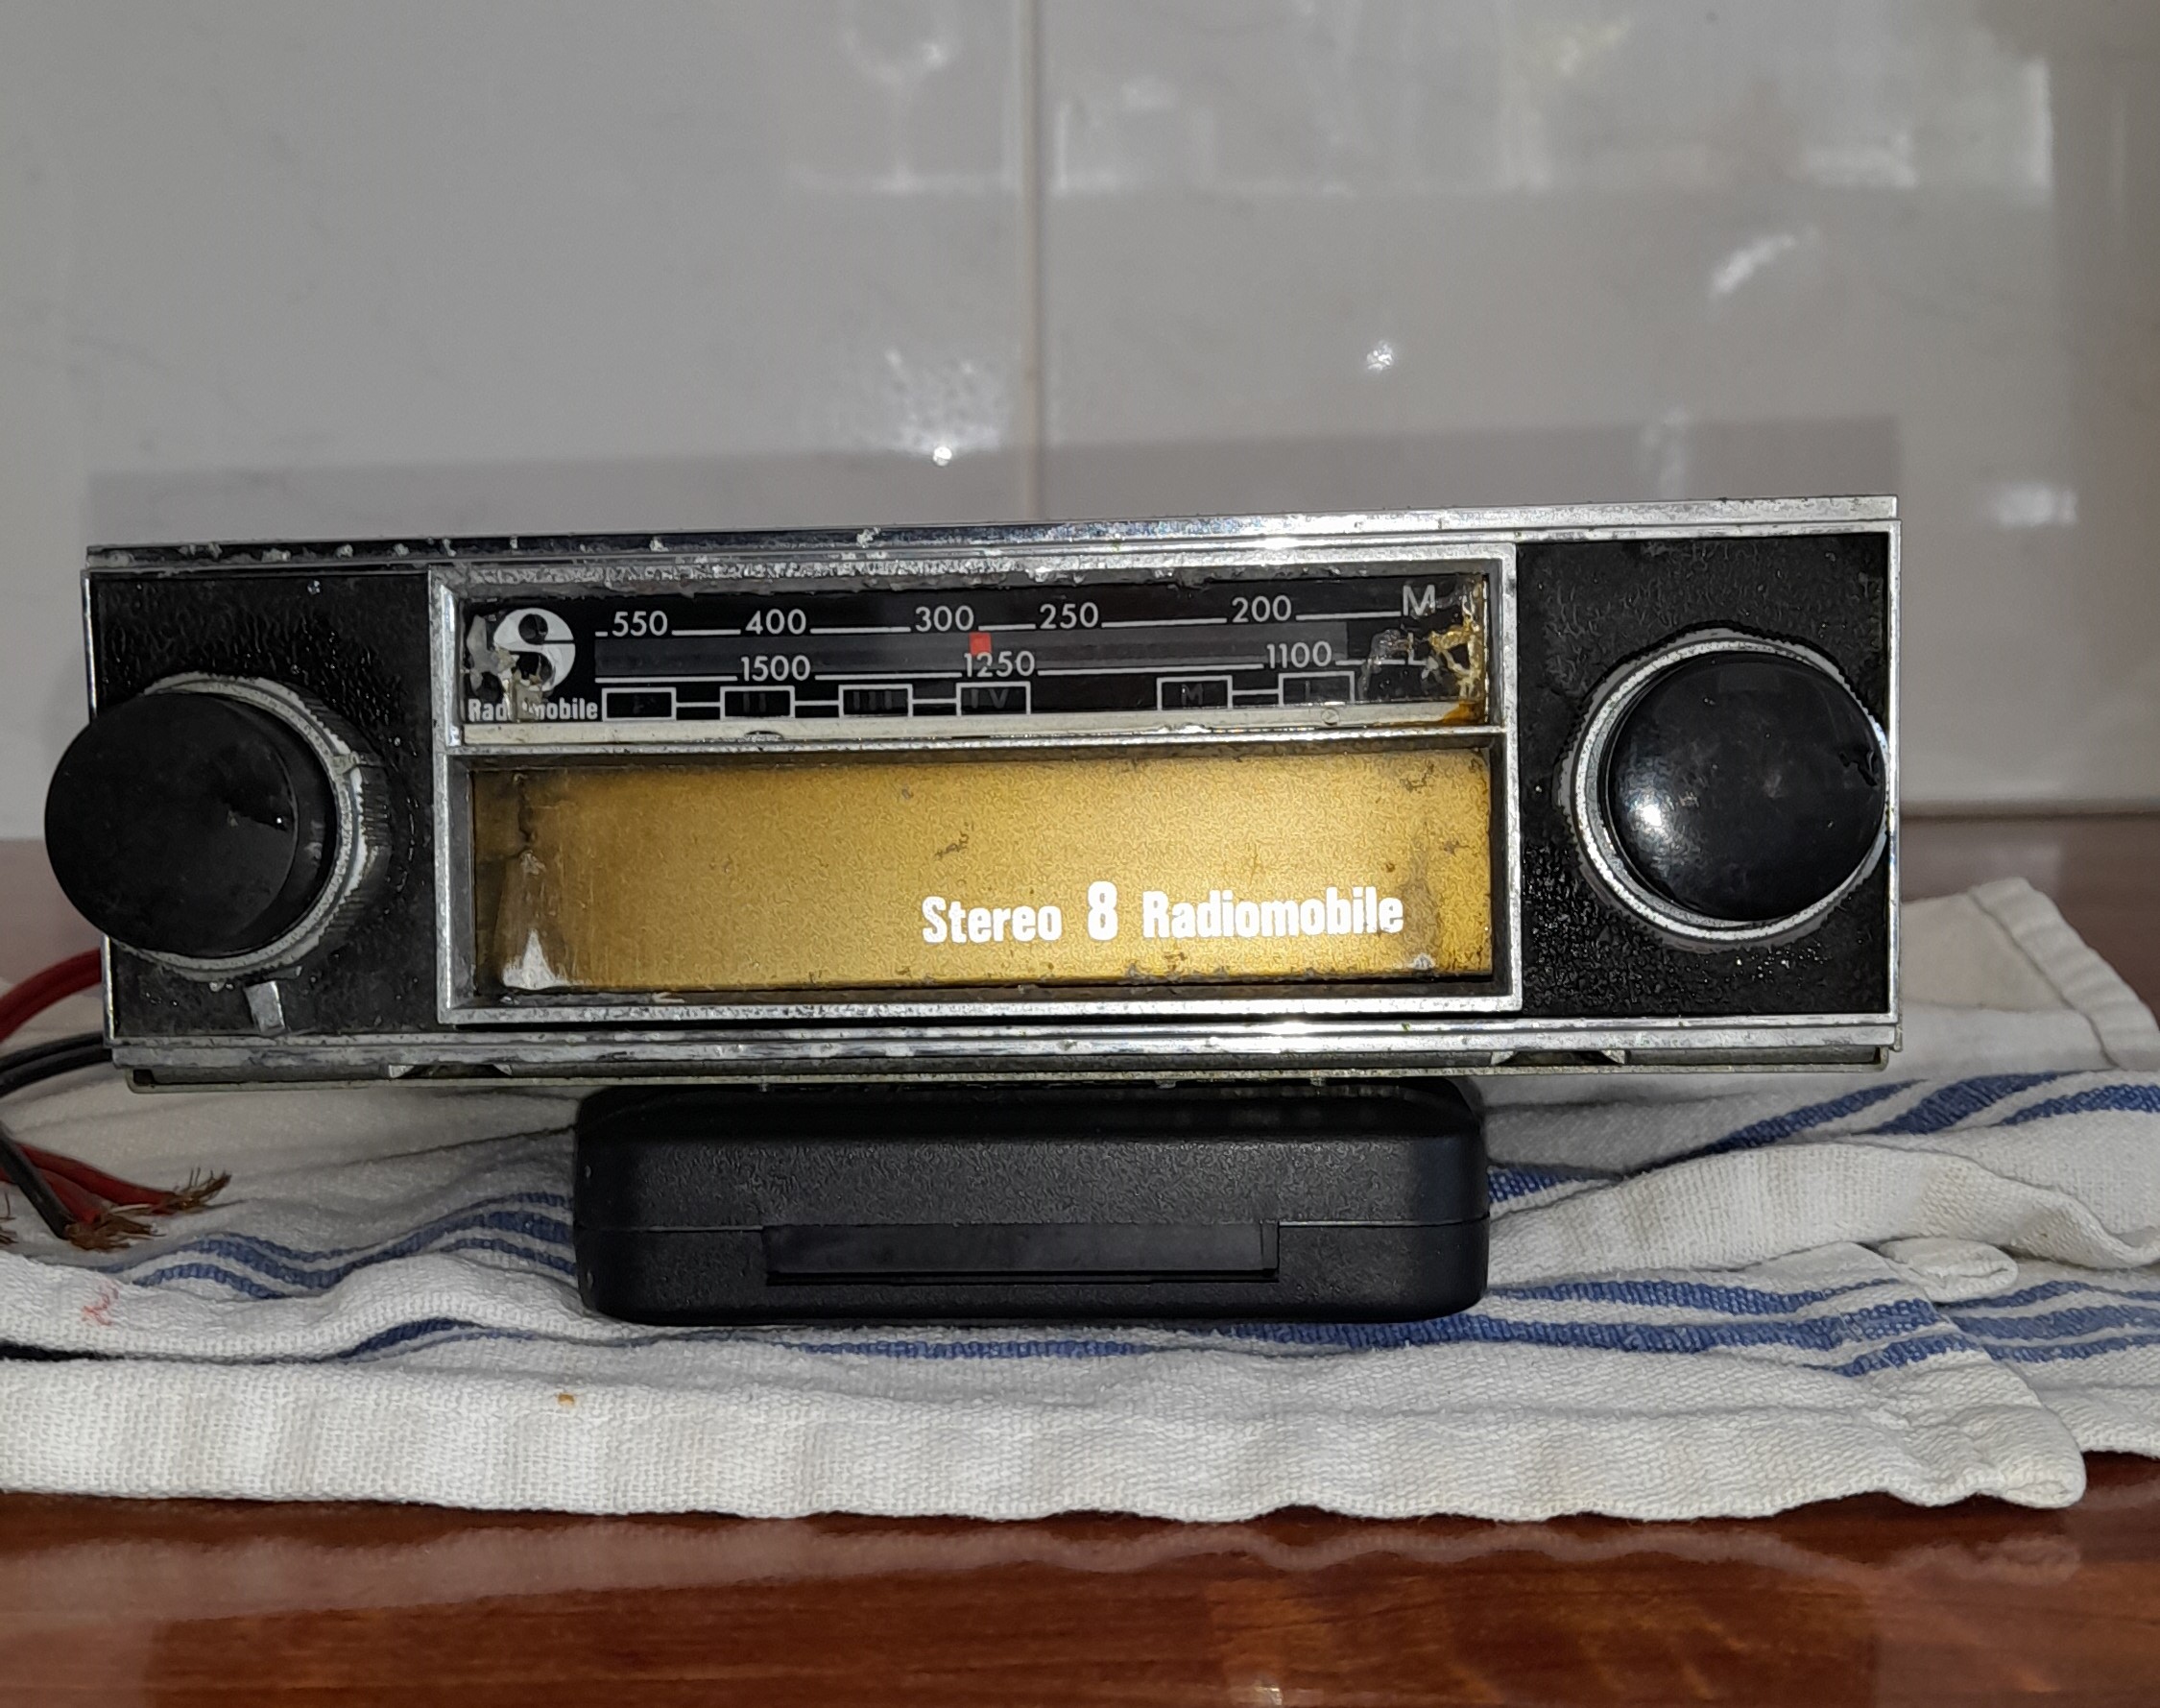 Radiomobile 8 track player for sale Evoke Classics FREE Classified Ads